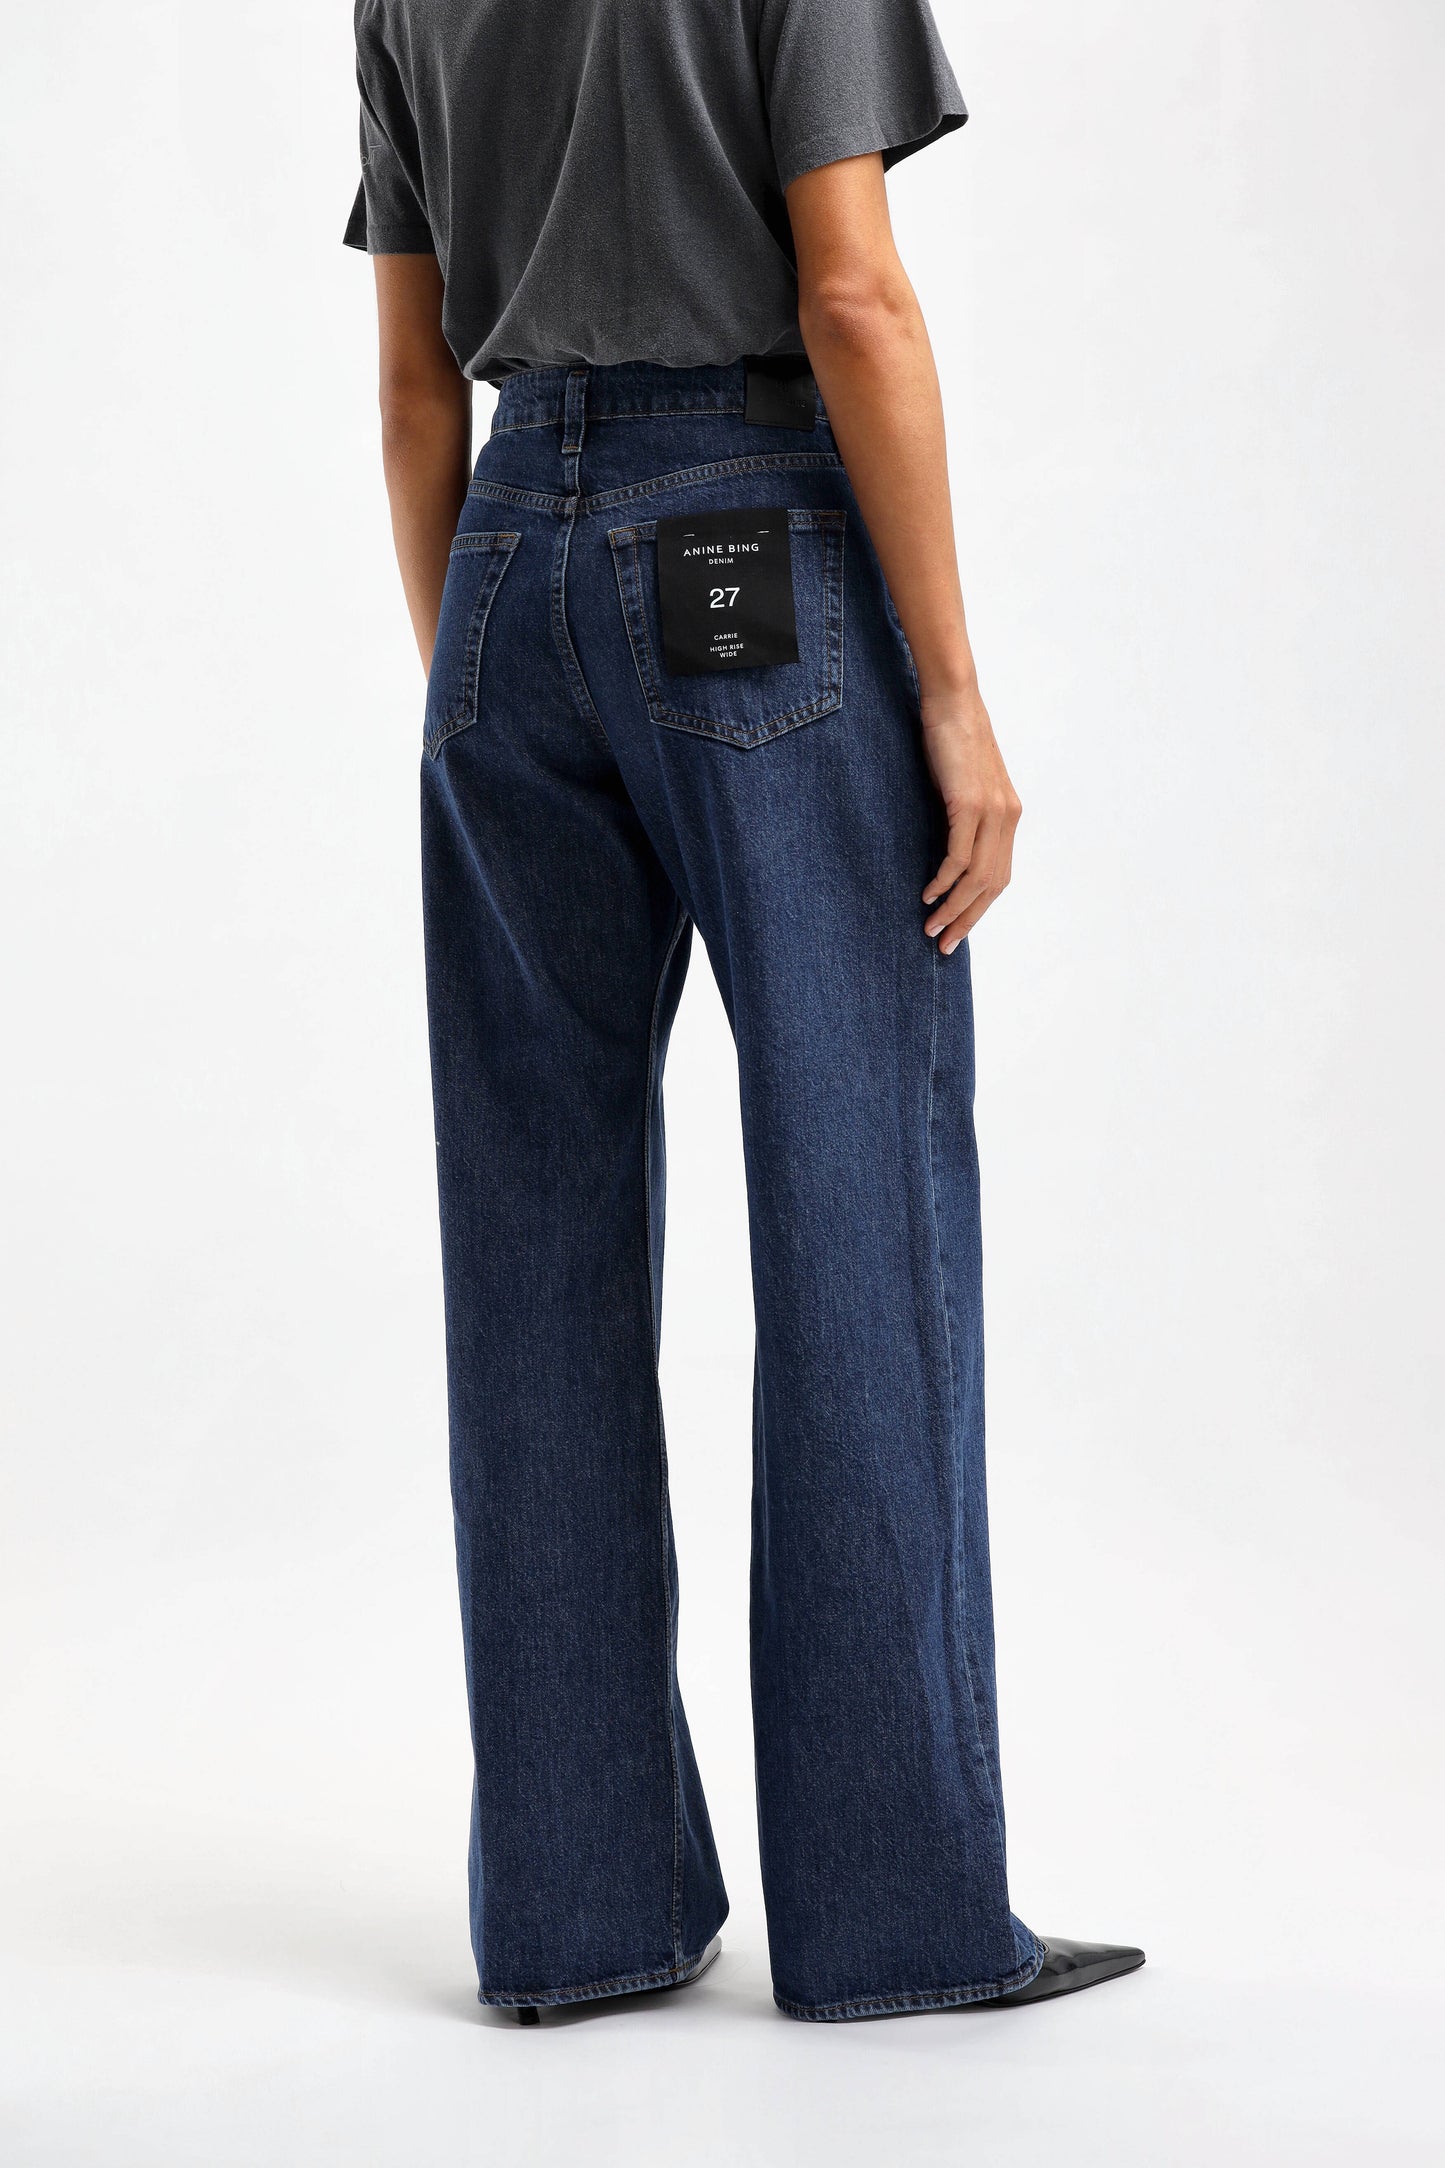 Jeans Carrie in Sapphire BlueAnine Bing - Anita Hass